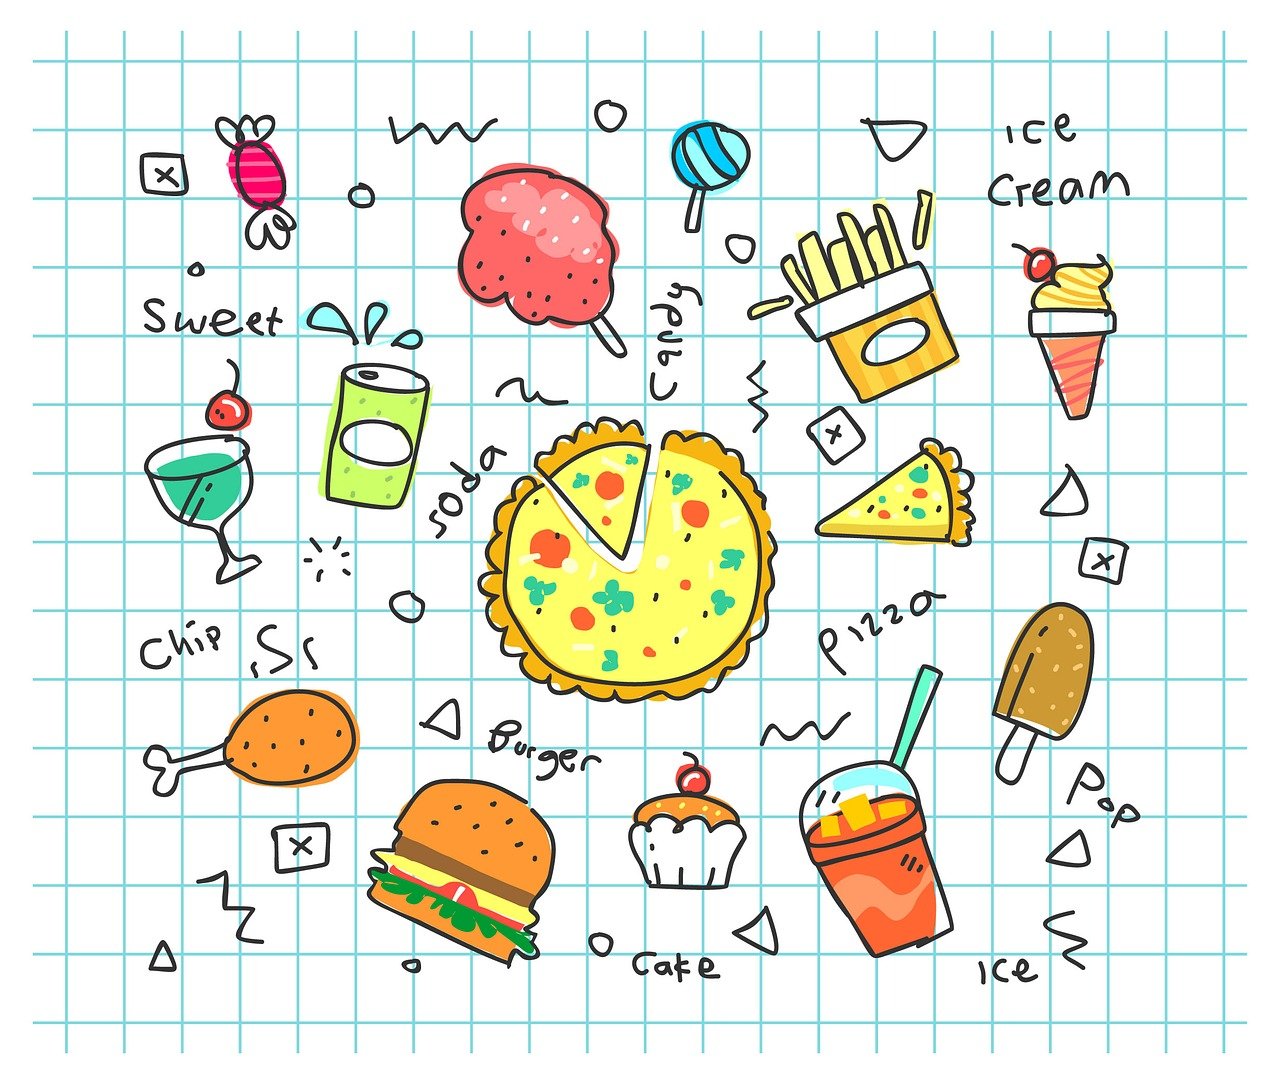 a drawing of food and drinks on a checkered sheet, shutterstock, 😃😀😄☺🙃😉😗, 🥥 🍕 hybrid, cute cartoon style, stick